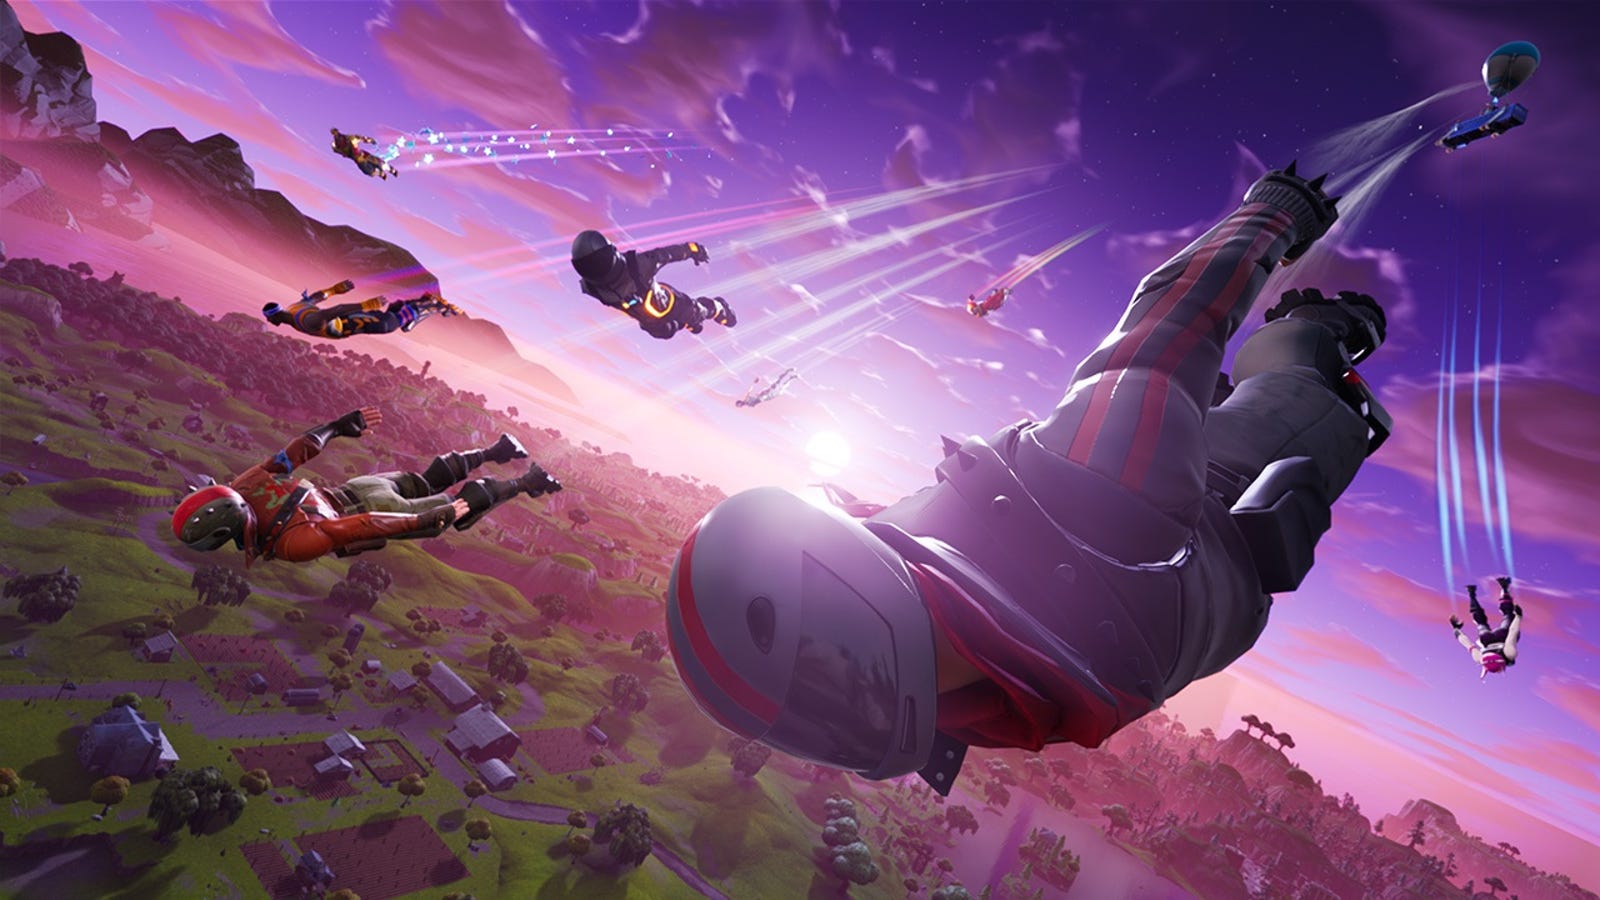 Fortnite On Switch Has Built In Voice Chat No App Required - 